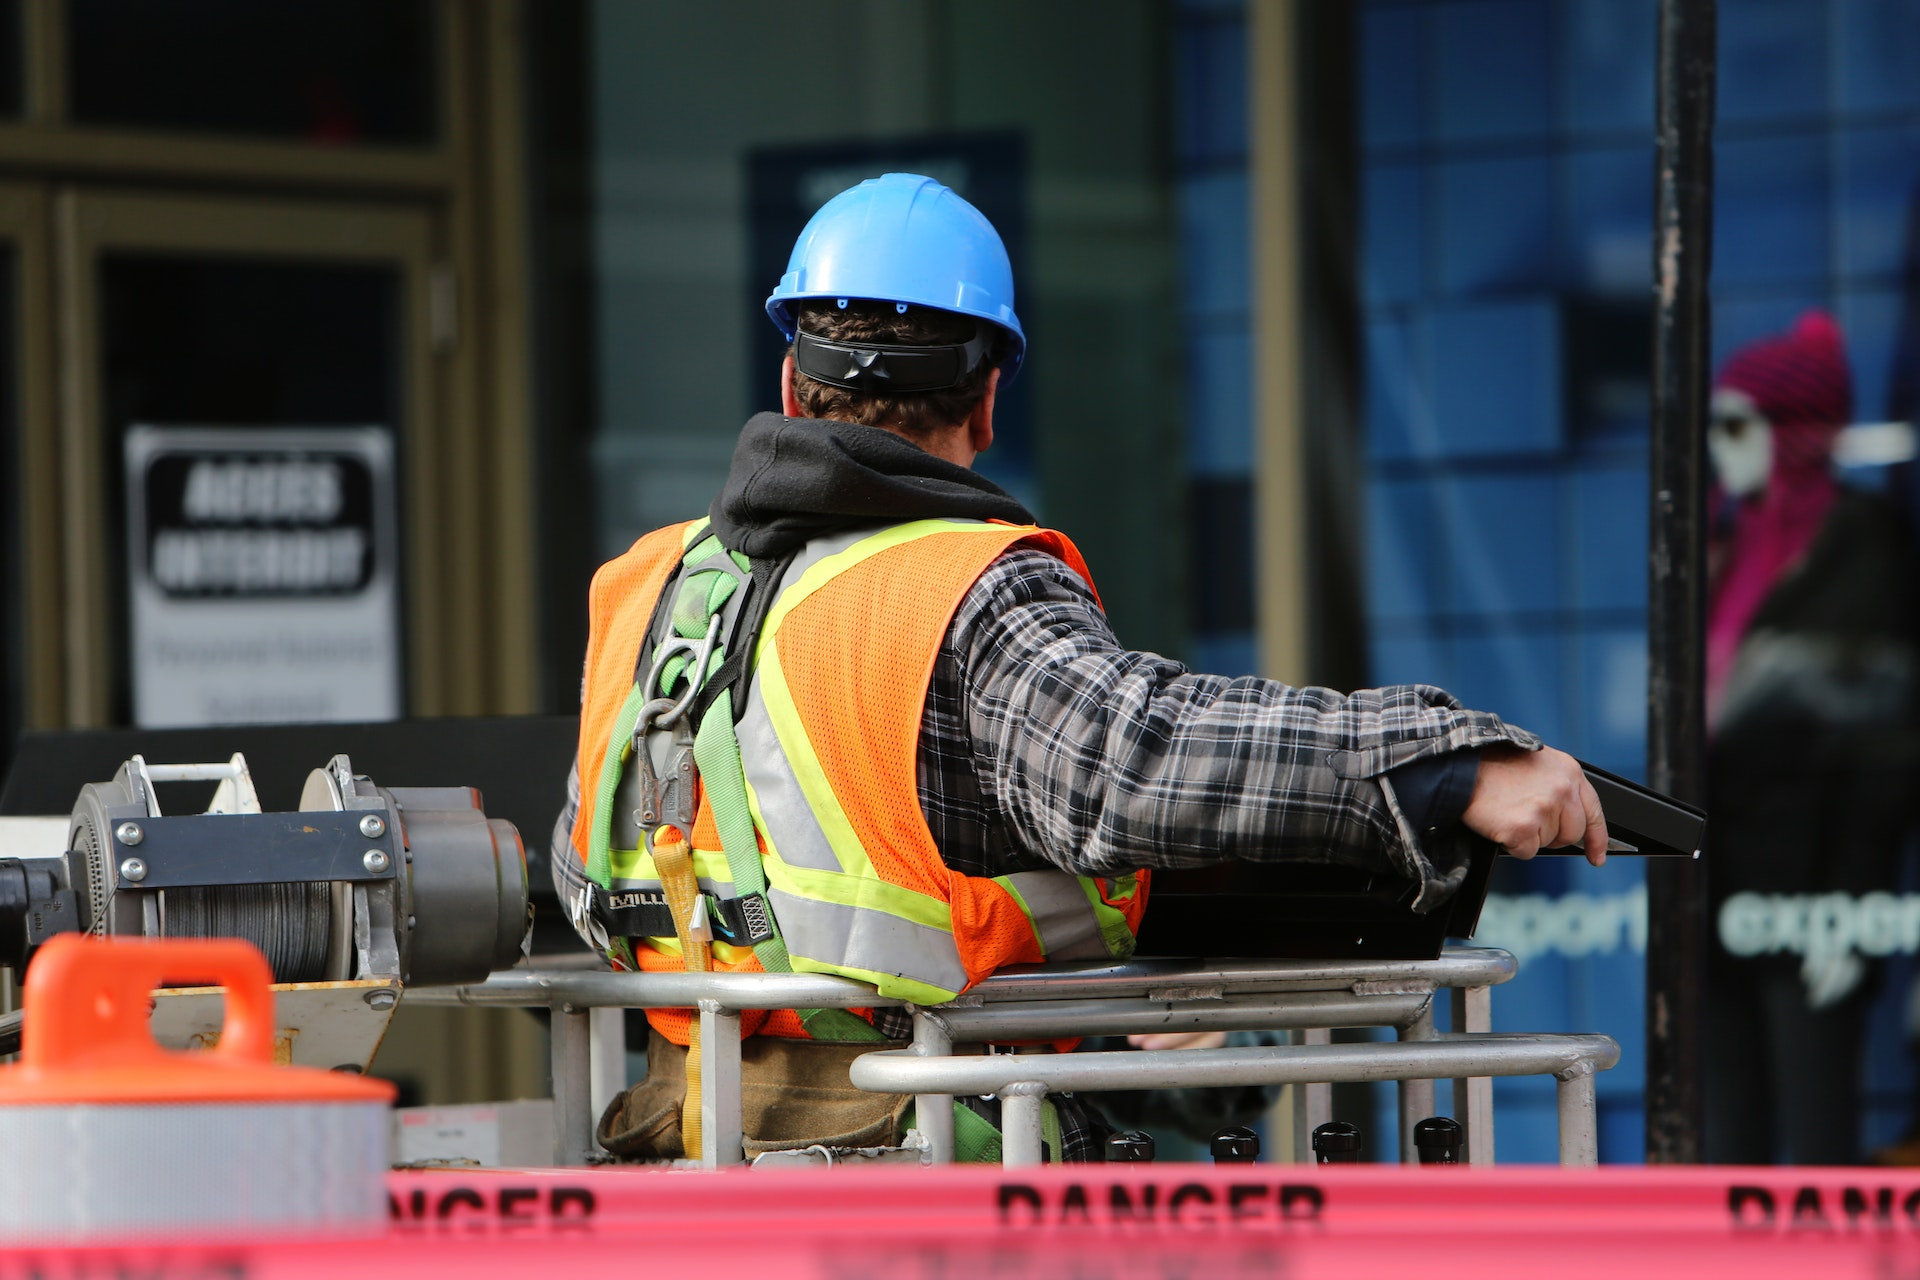 Construction workers in hard hats and safety vests working on a building